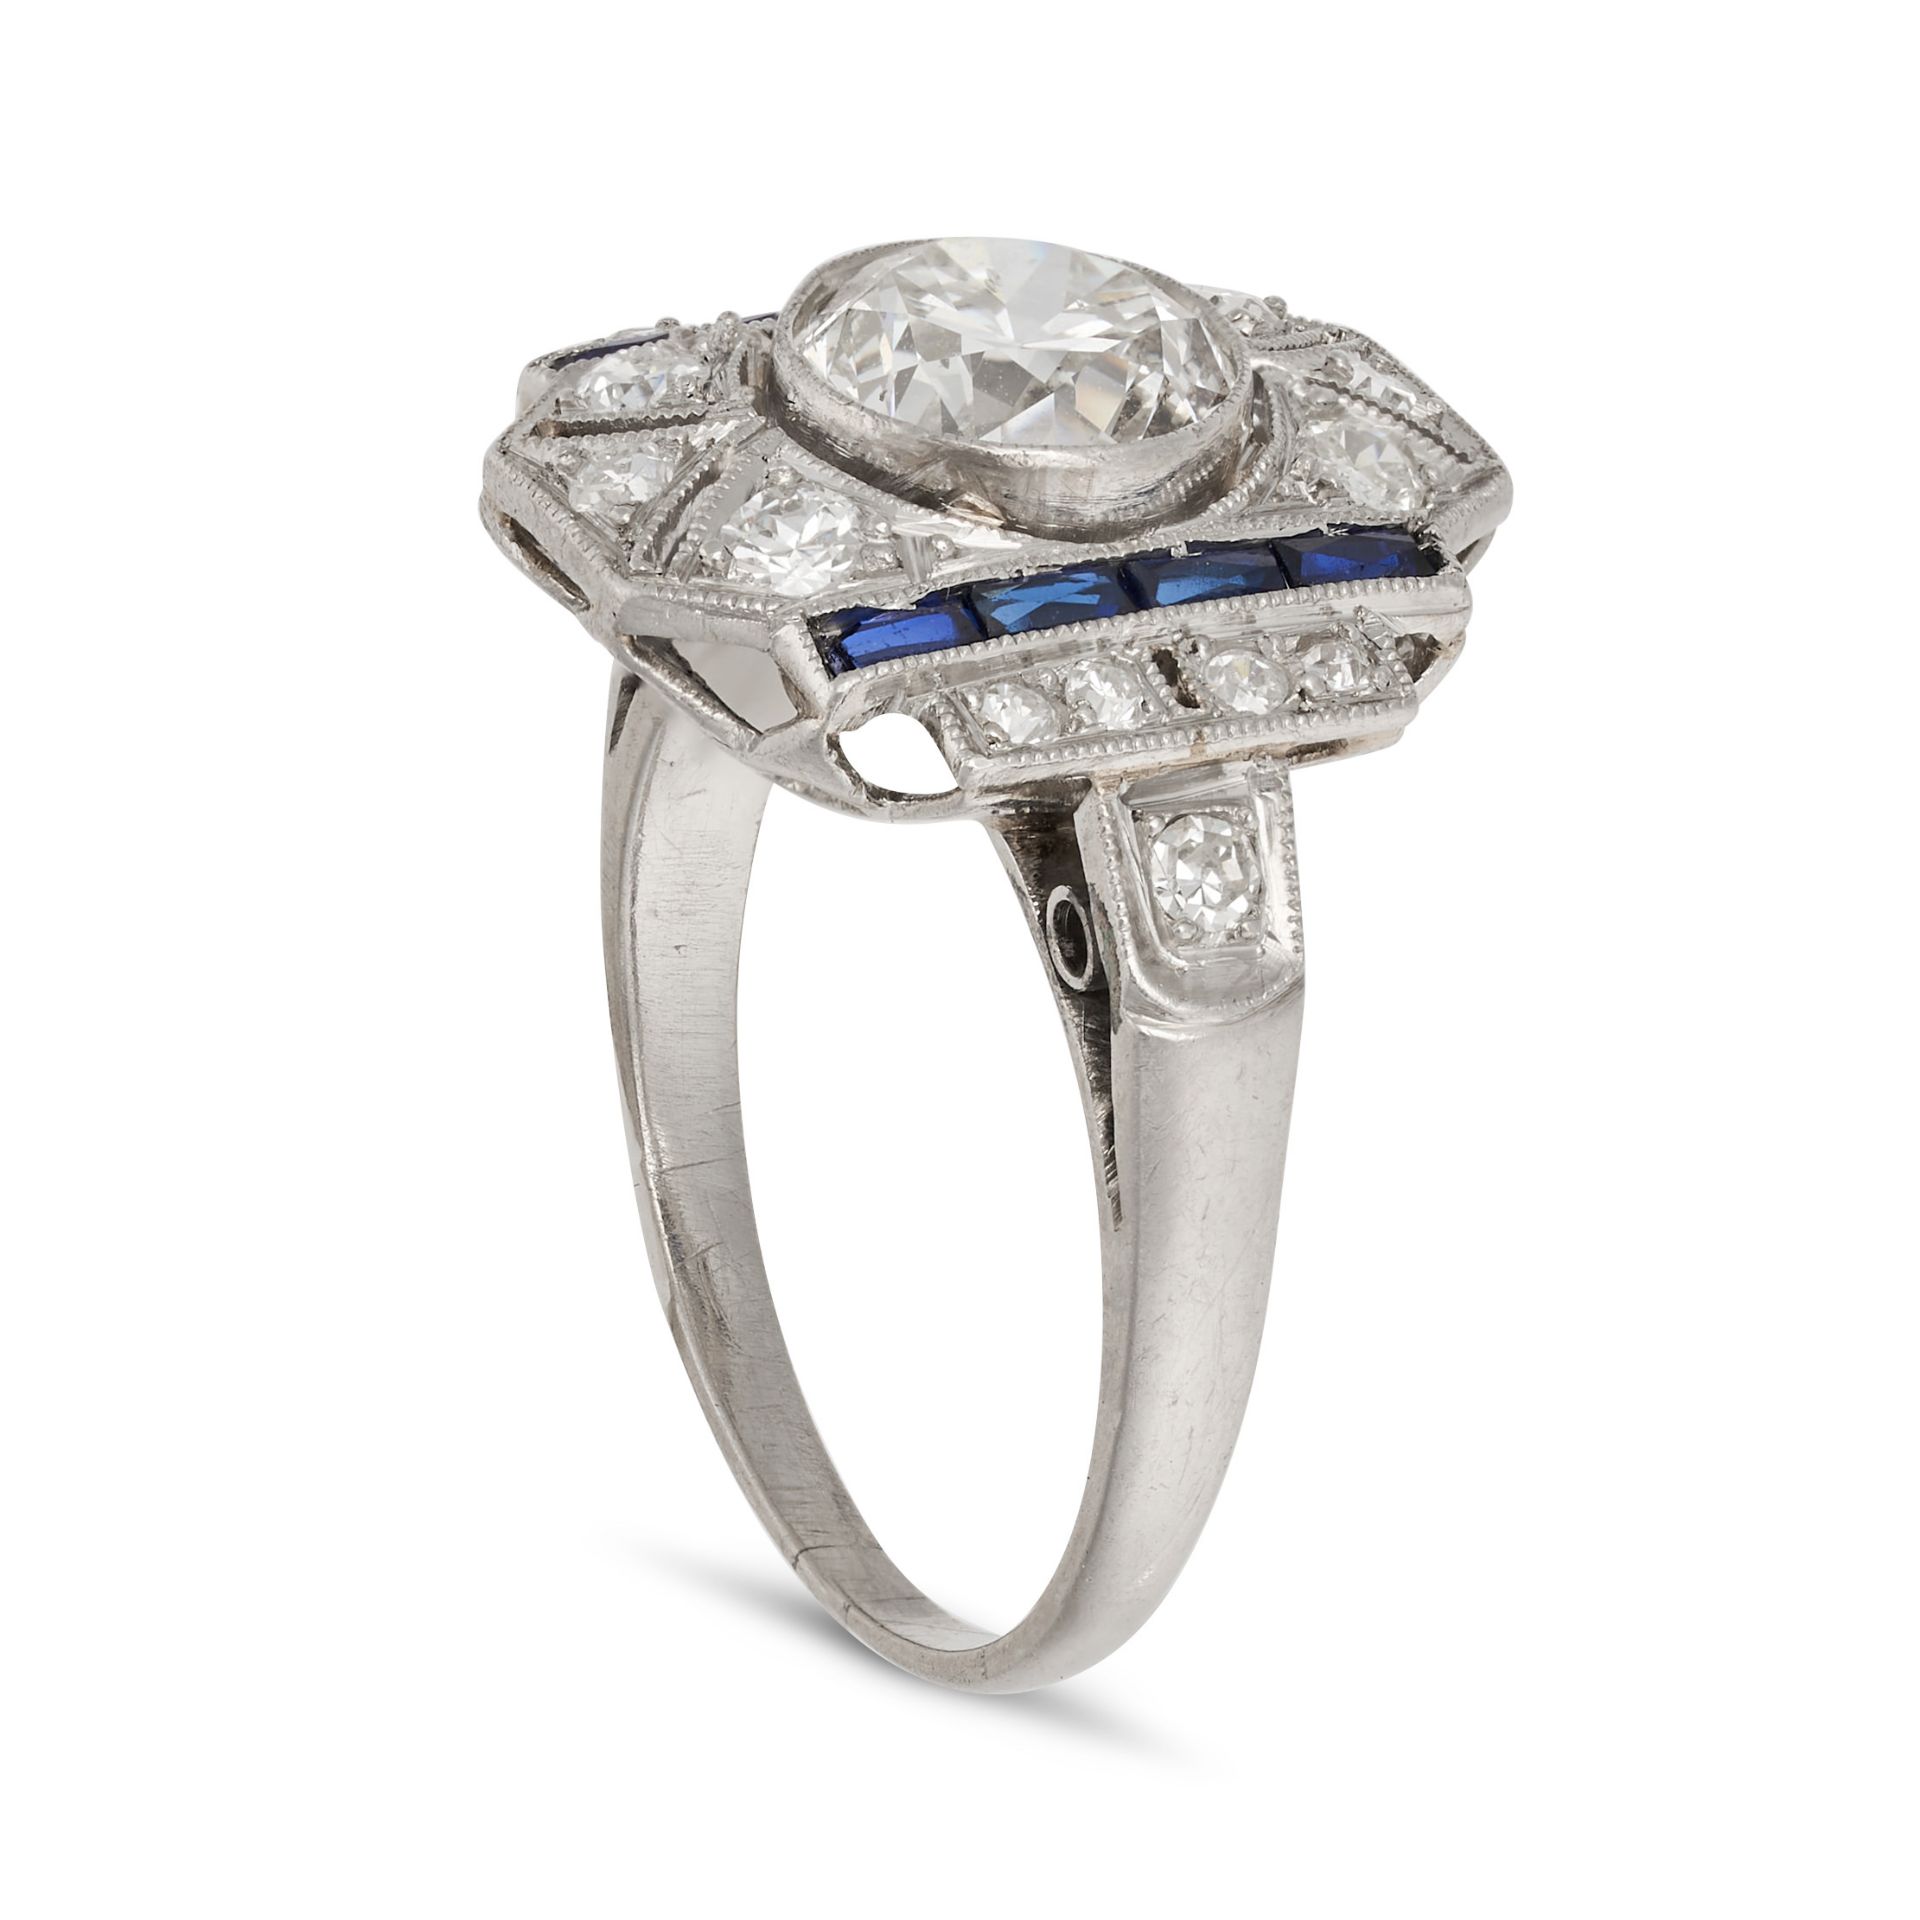 AN ART DECO DIAMOND AND SAPPHIRE RING in platinum, set with an old European cut diamond of approx... - Image 4 of 4